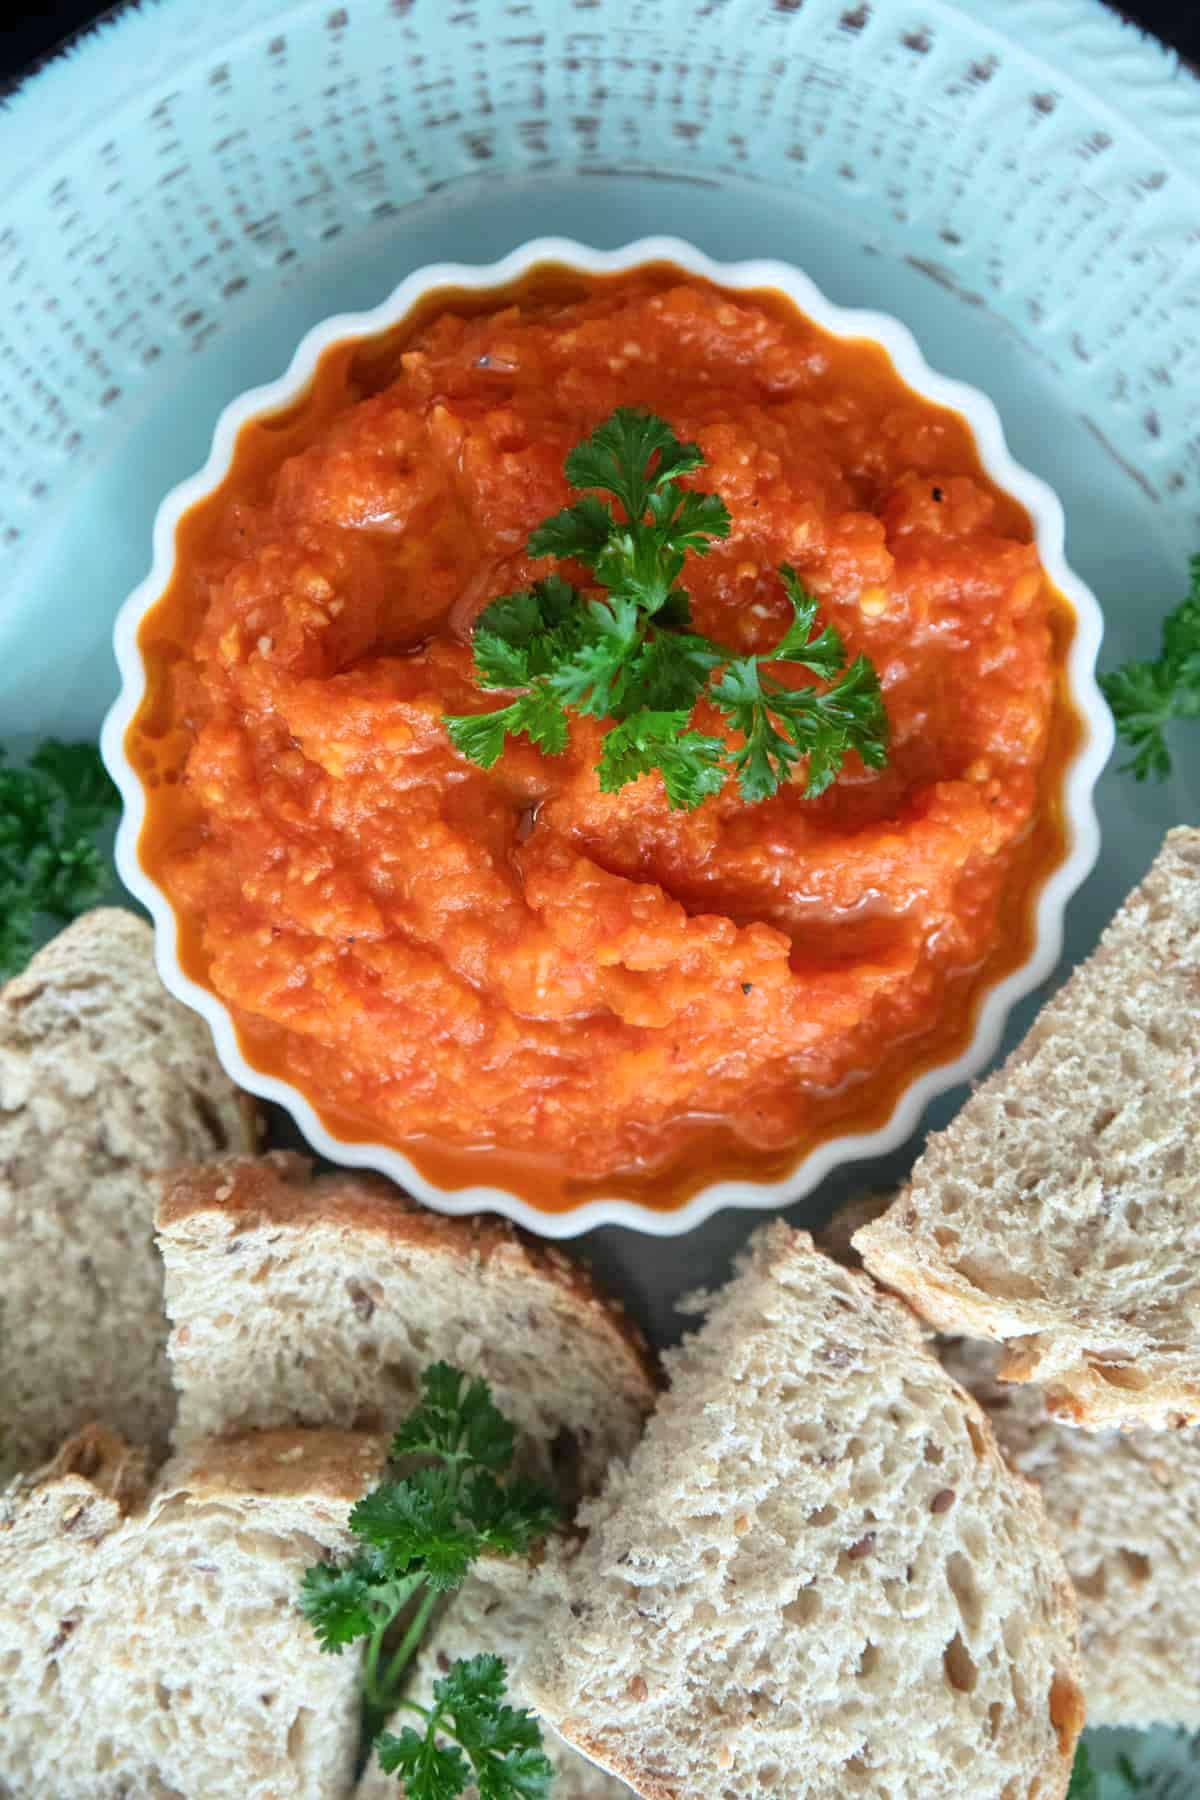 Serbian roasted red pepper sauce known as ajvar.